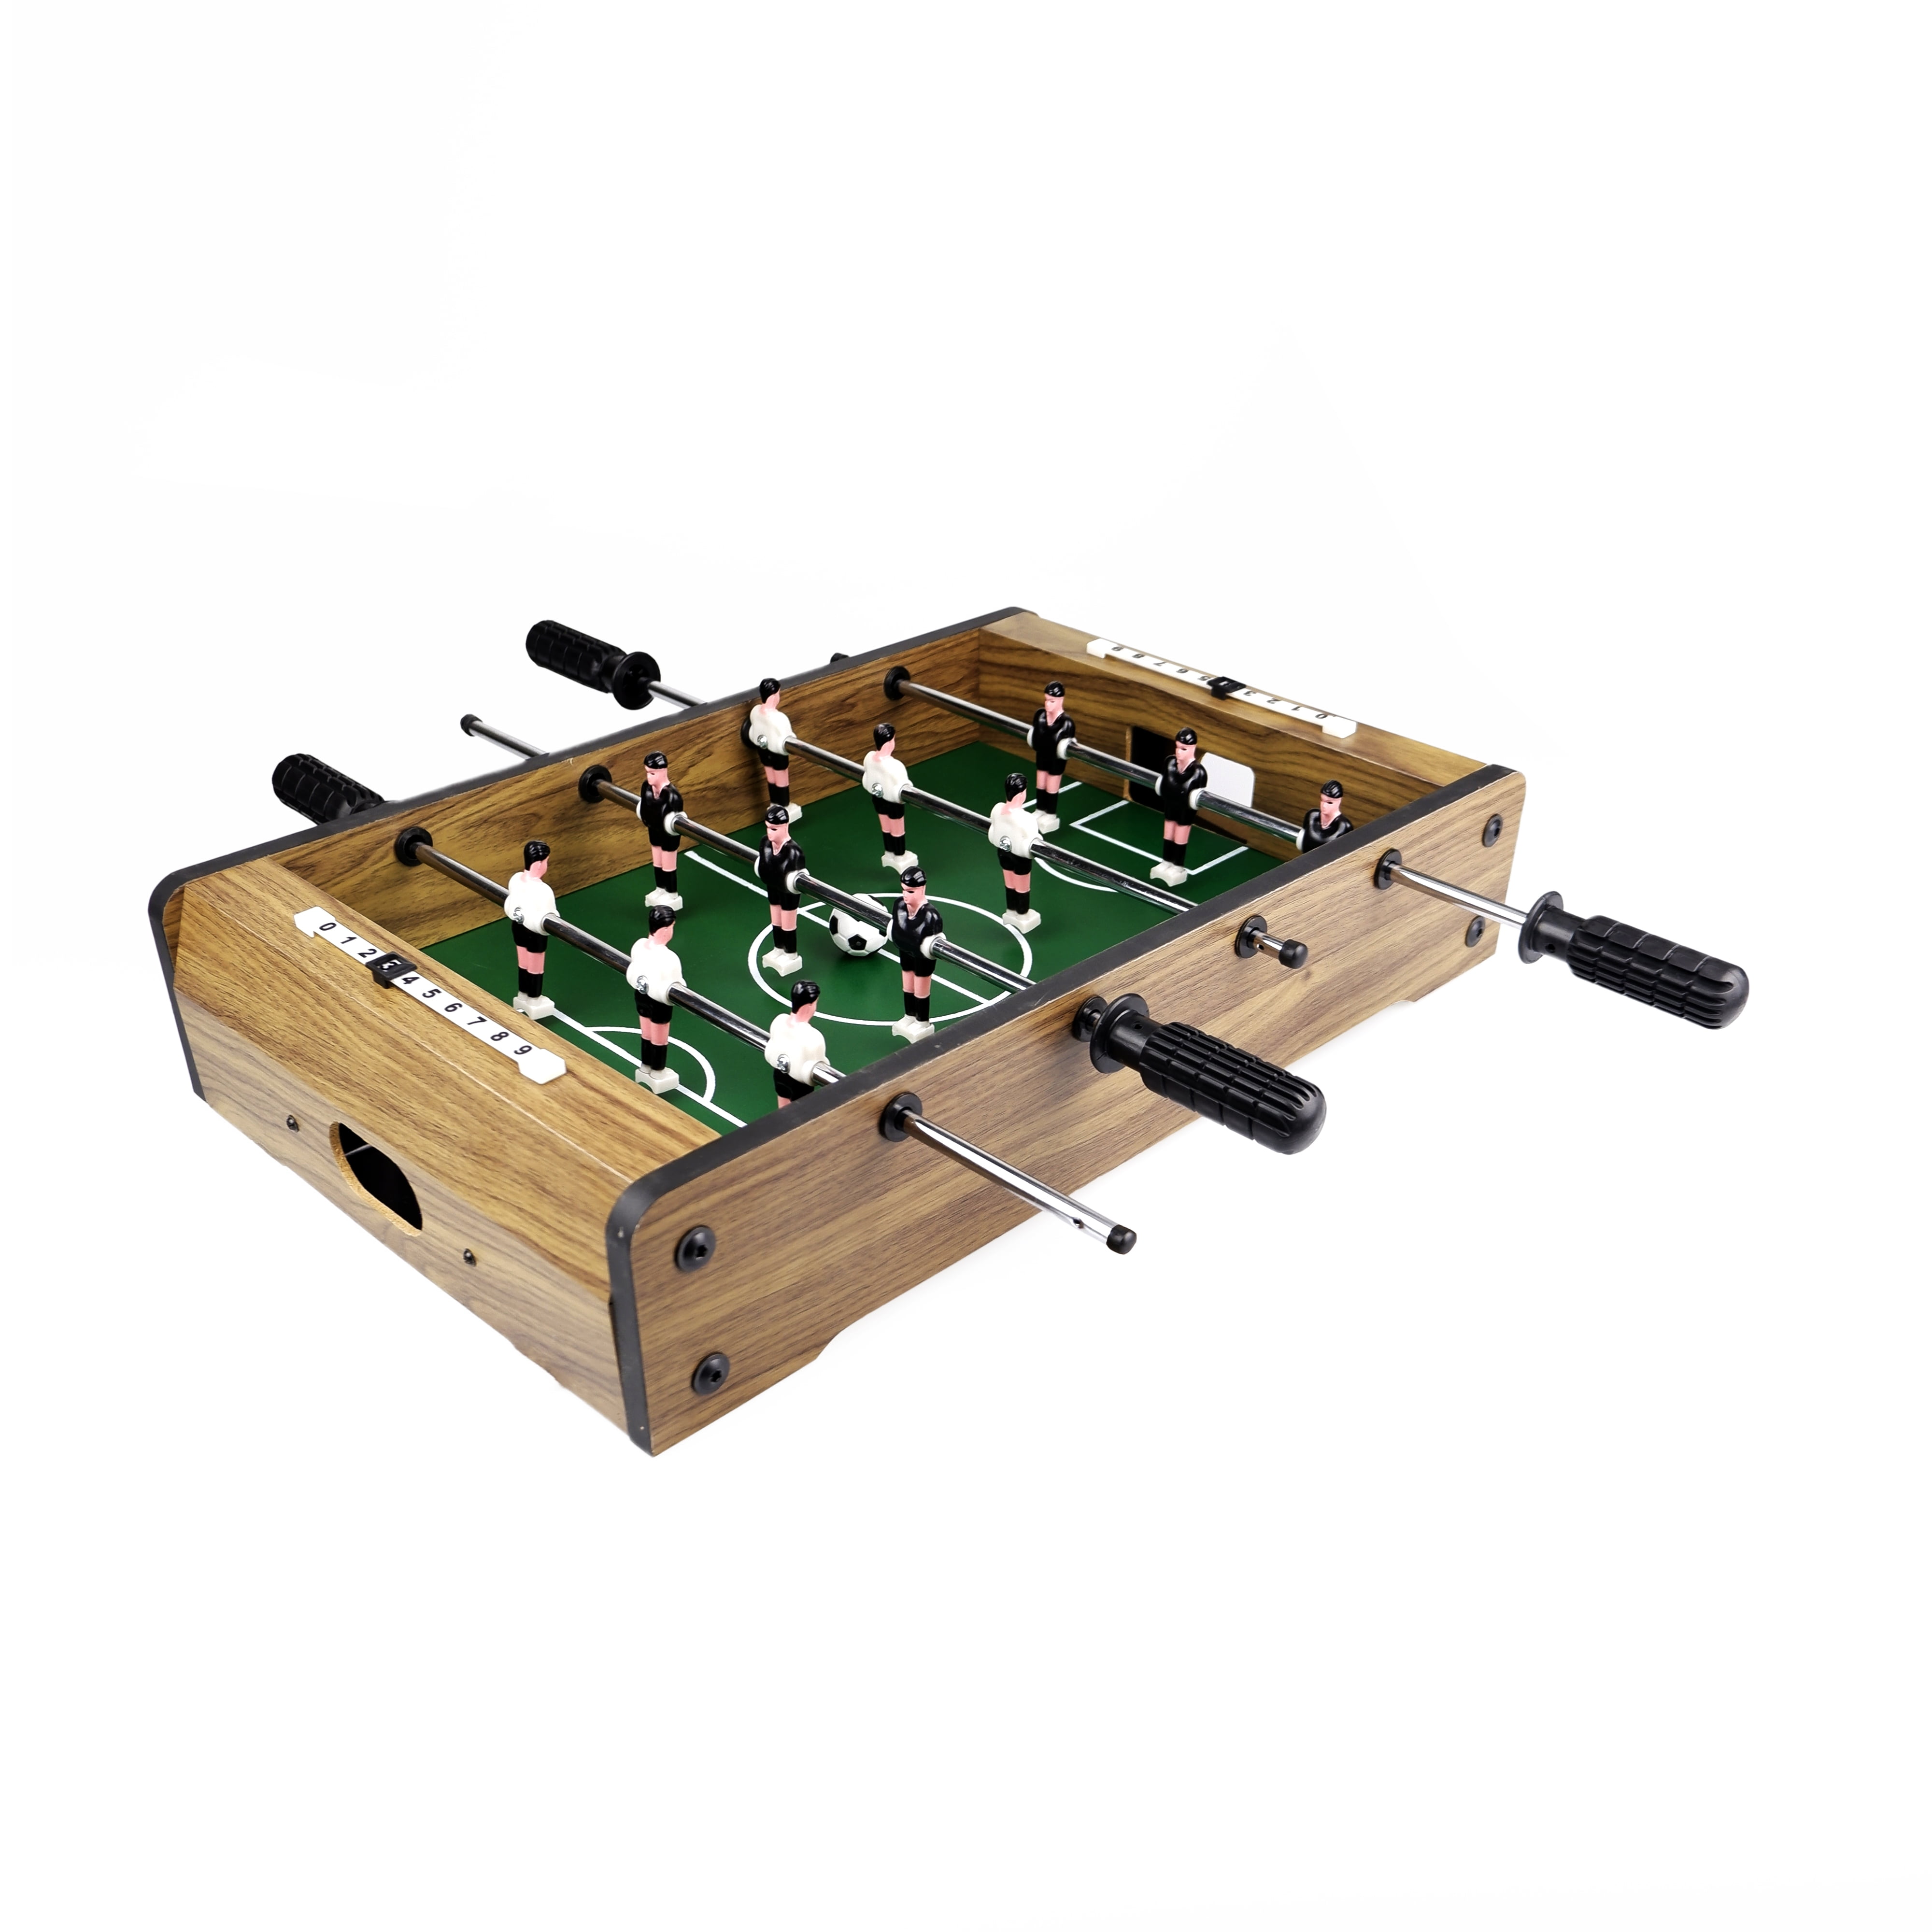 Football Table Soccer Foosball Kicker Table Game Ball Table Wood with Cup Holder 